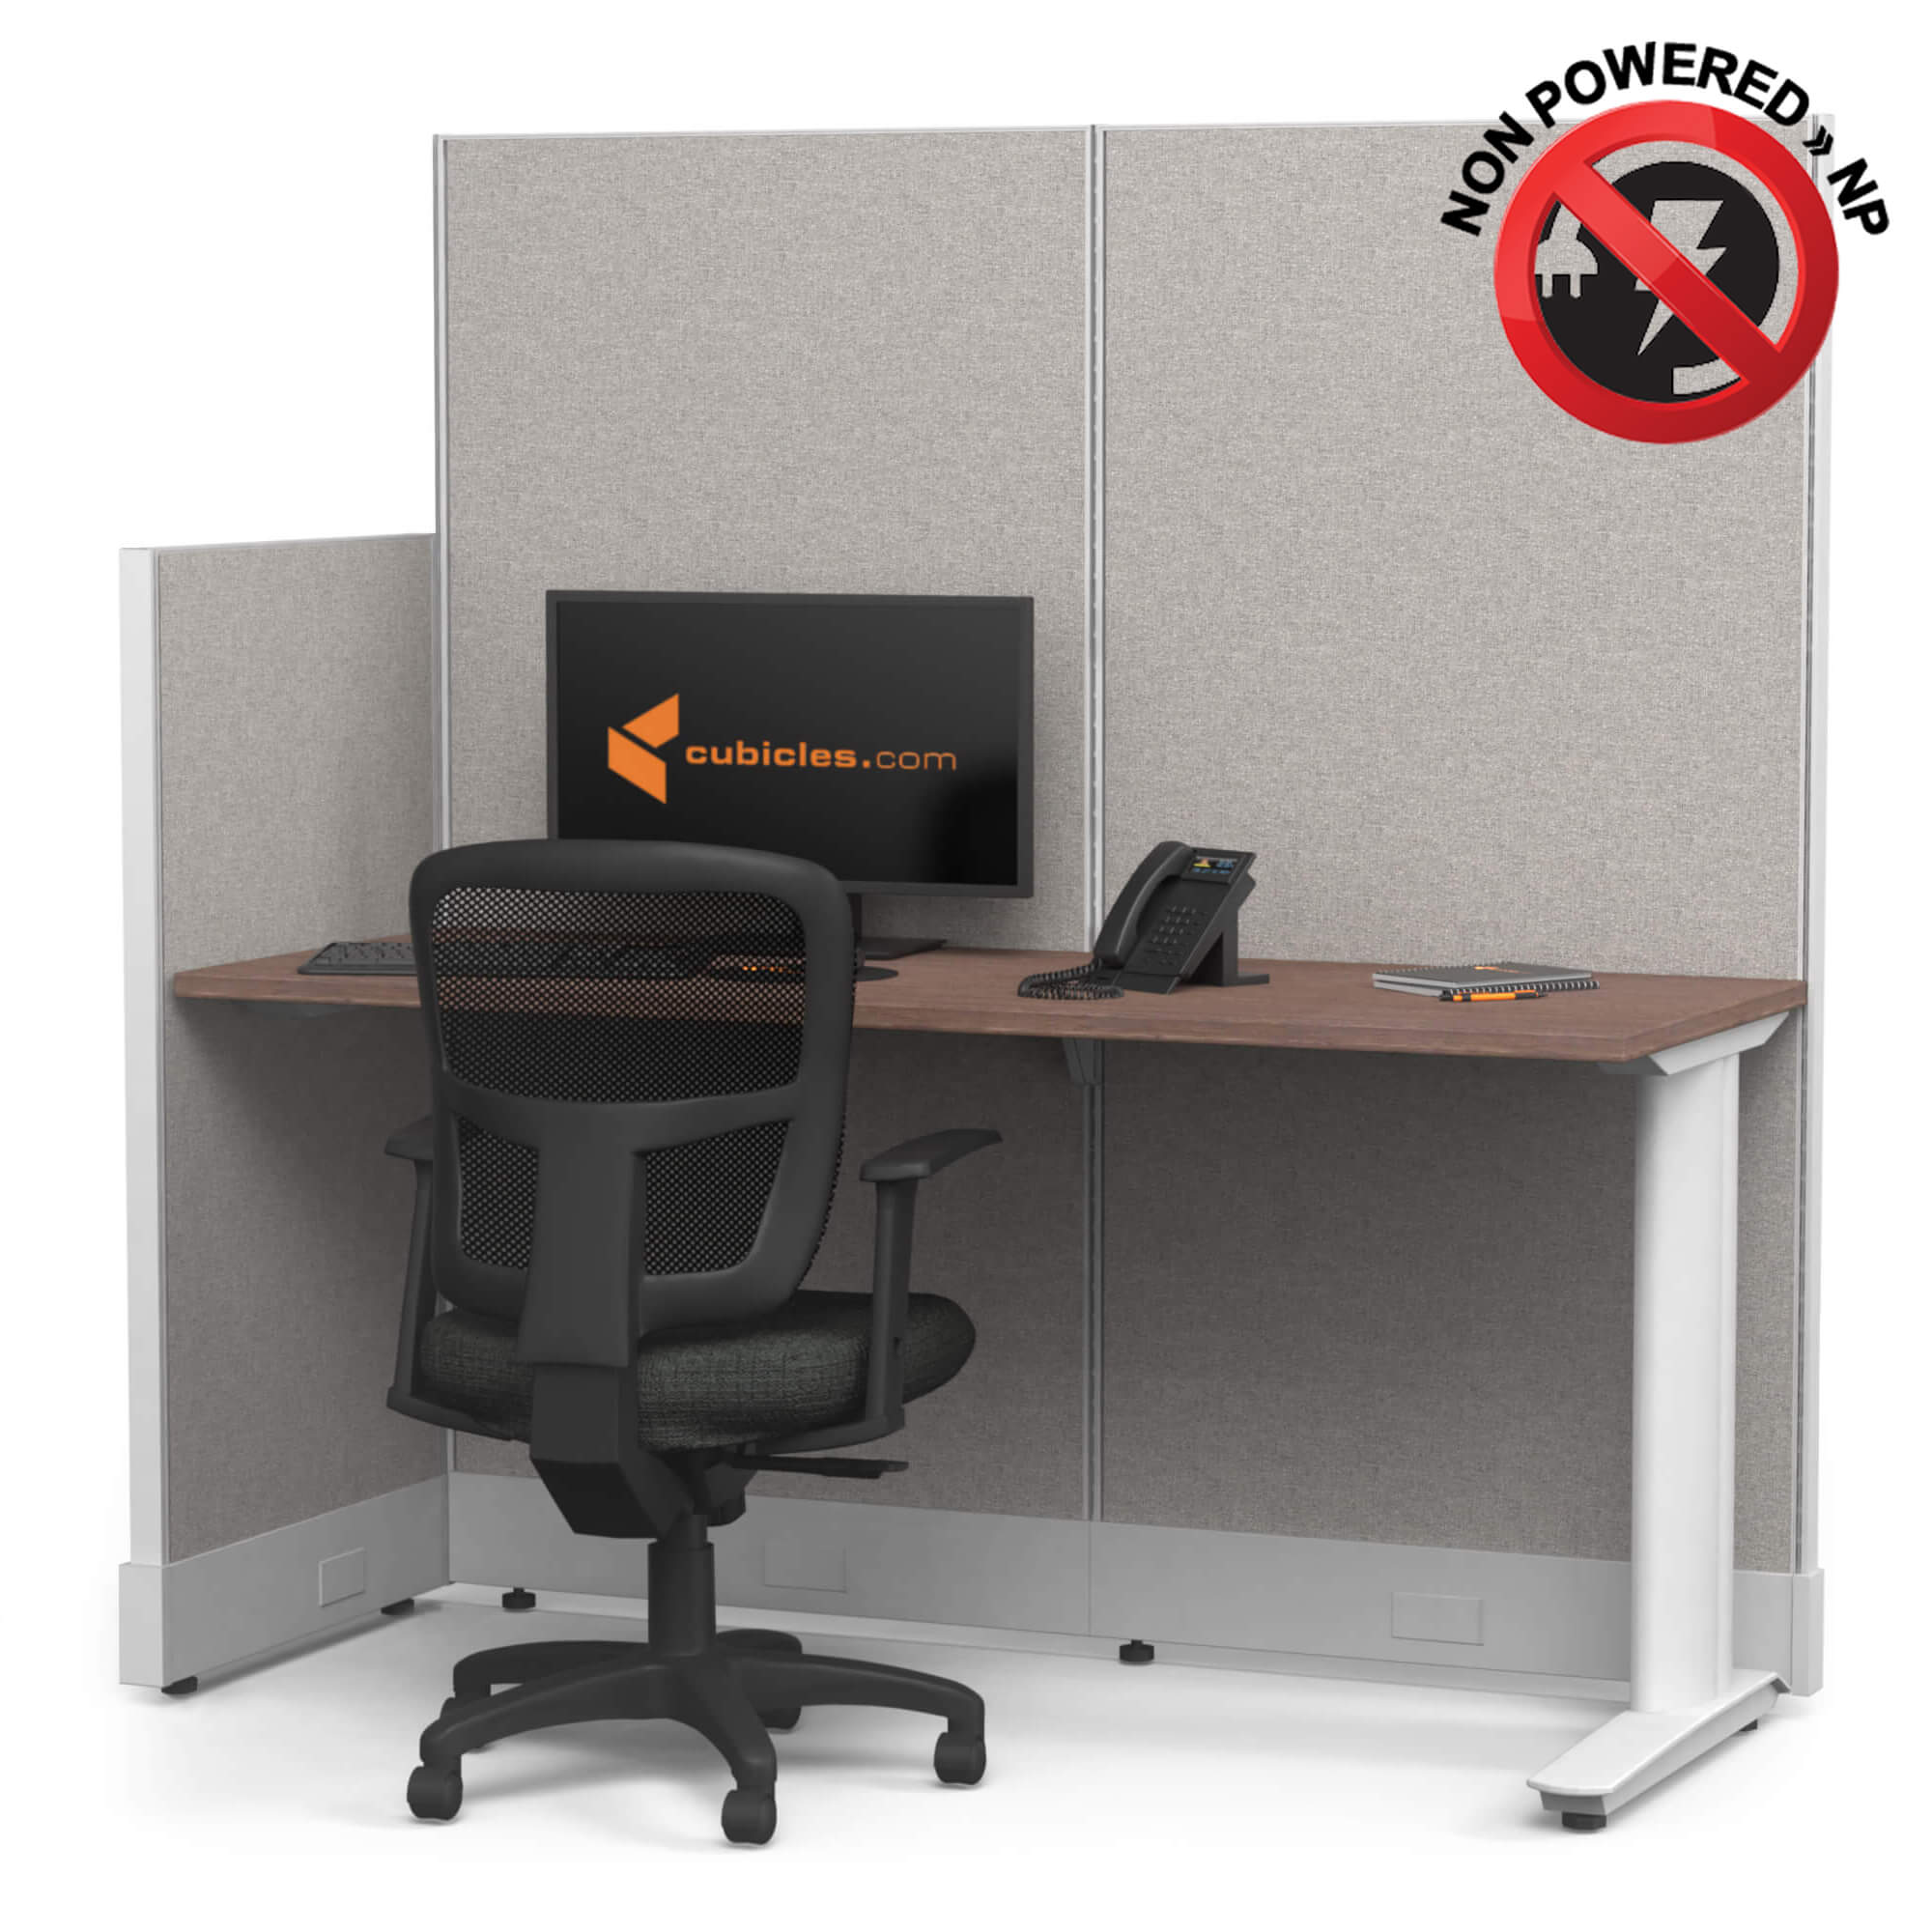 Cubicle desk straight 1pack non powered sign